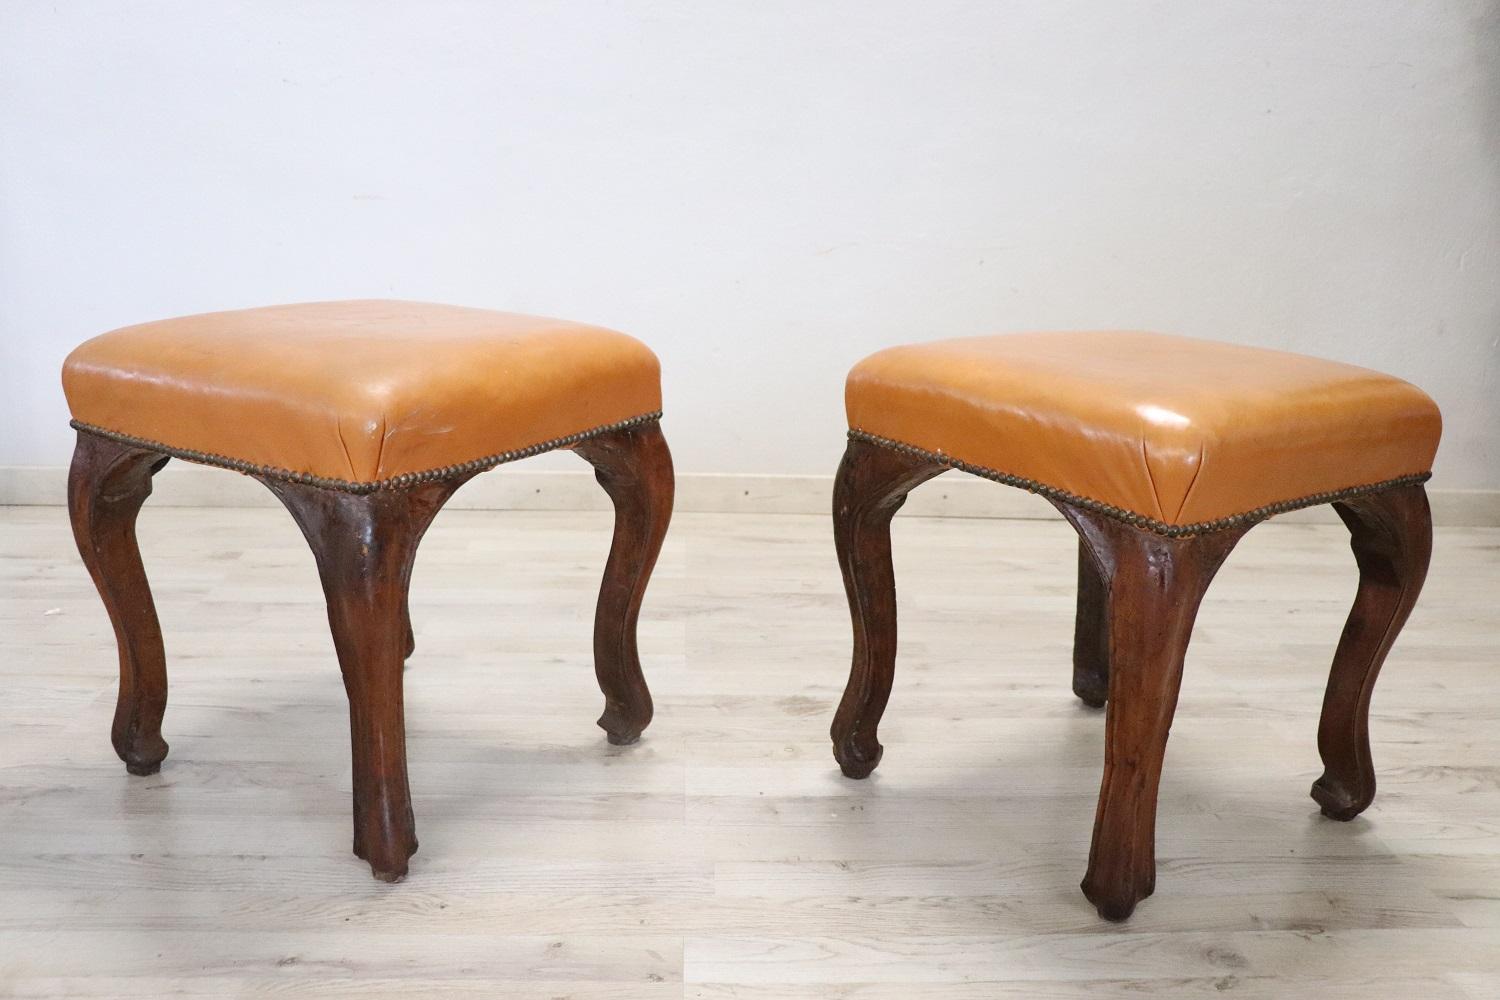 Italian 18th Century Walnut and Leather Pair of Antique Stools For Sale